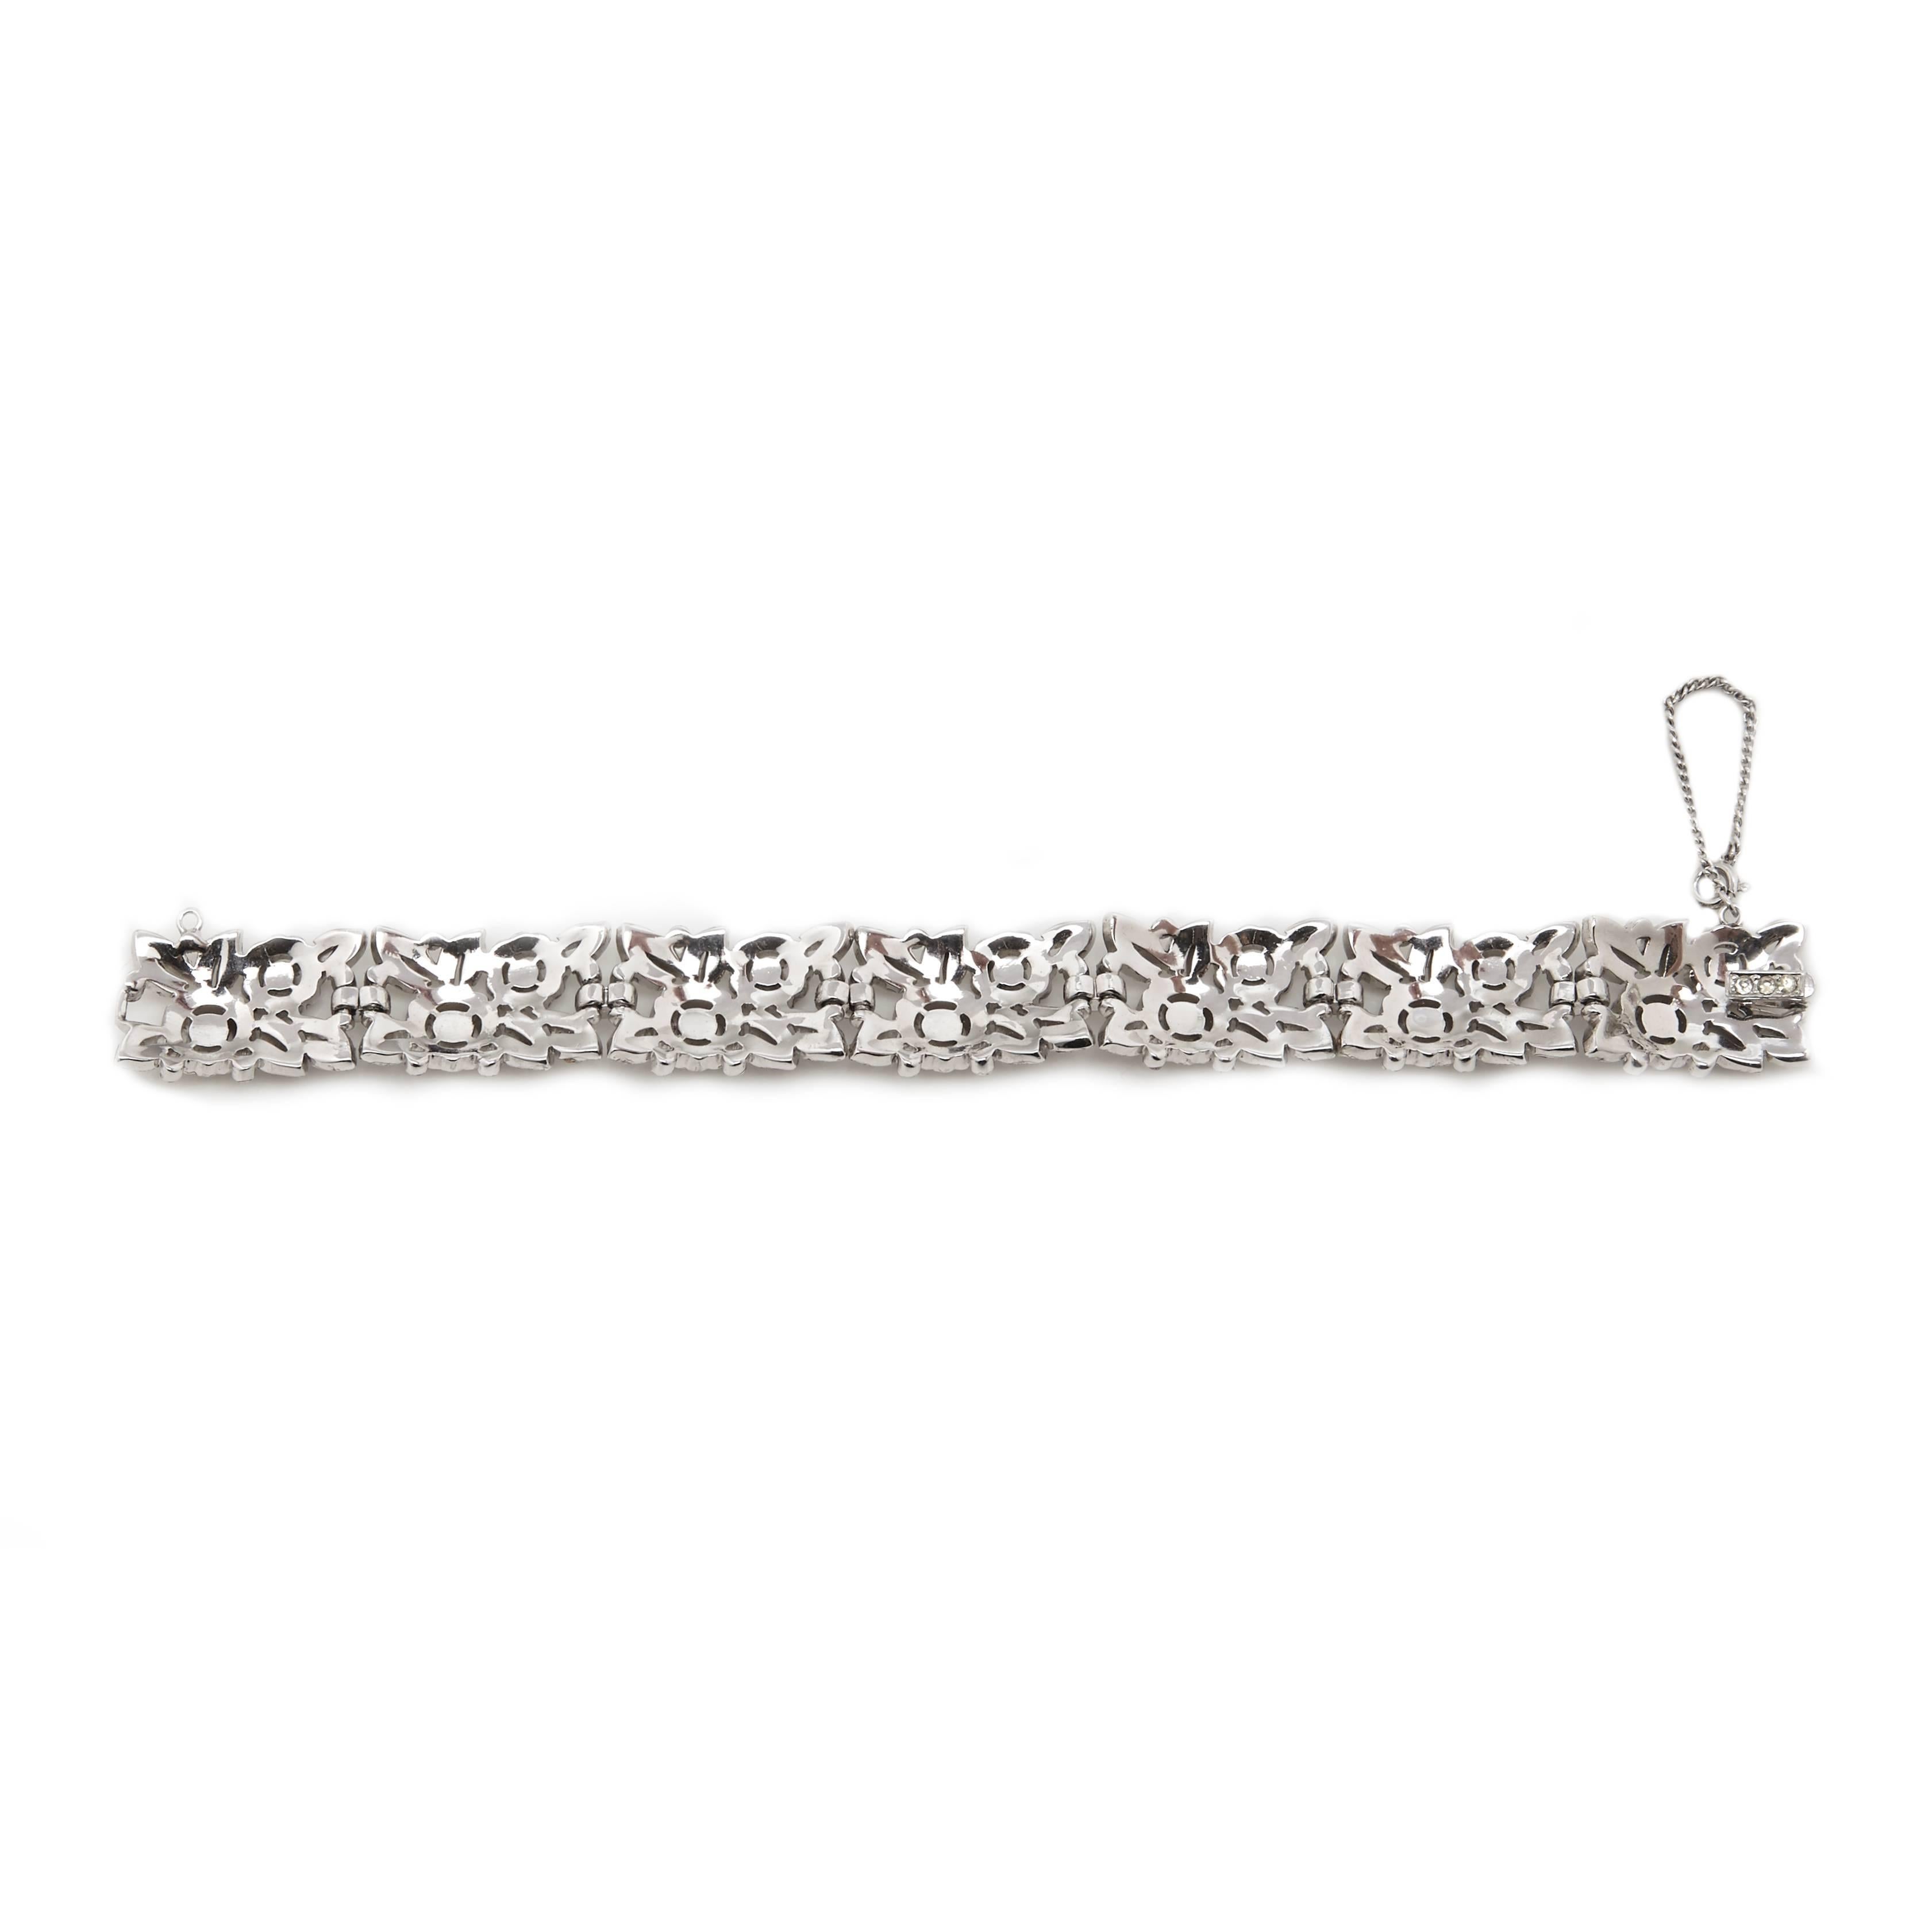 A stunning rhodium plated silver tone bracelet by Trifari.

The delicate open-work design is of flowers and foliage, it is made up of 7 articulated panels, each leaf is embellished with crystal rhinestones and two sizes of blooming flowers. It comes